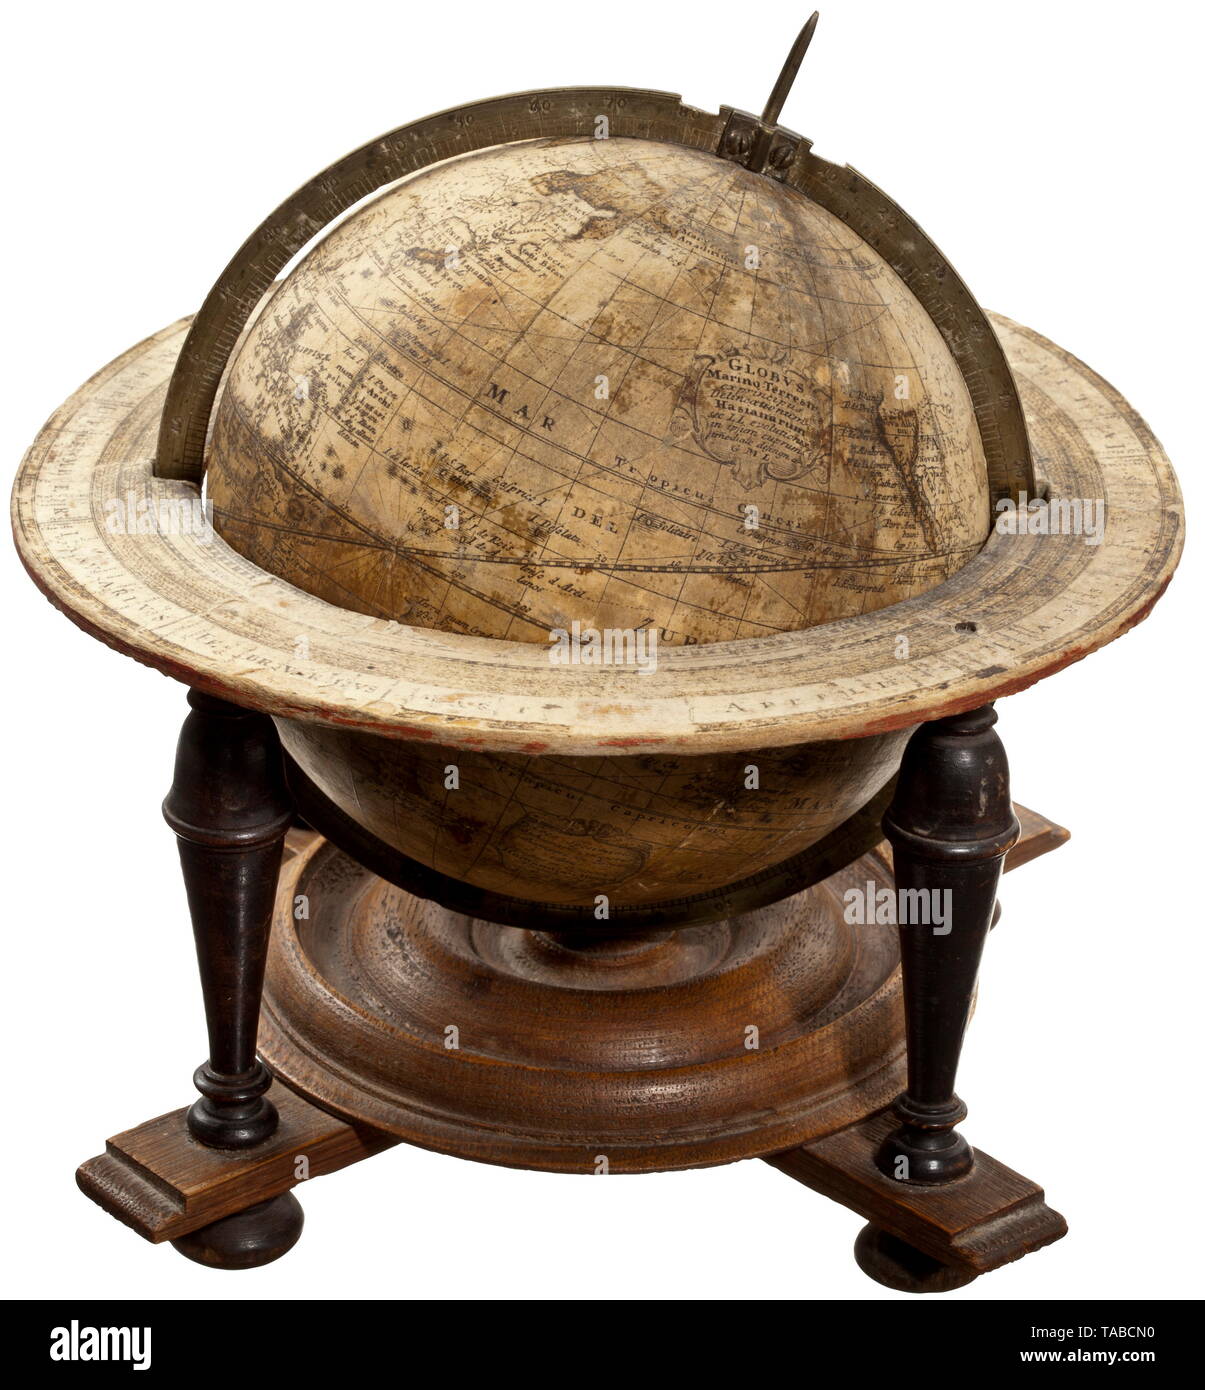 A table globe, Nuremberg, dated 1747 Hollow wrought, the entire surface applied with paper, the map finely copper engraved, the country borders partly coloured by hand. Two cartouches in baroque script with maker designation 'Hommanian Hered - Norimb. 1747'. Brass ring with engraved degree graduation. Original, wooden stand with finely turned columns, paperboard appliqué with a fine copper-engraved scale on the upper side. Height 21 cm, globe diameter 13 cm. The copper engraving in part heavily faded, the North American area of the globe heavily , Additional-Rights-Clearance-Info-Not-Available Stock Photo